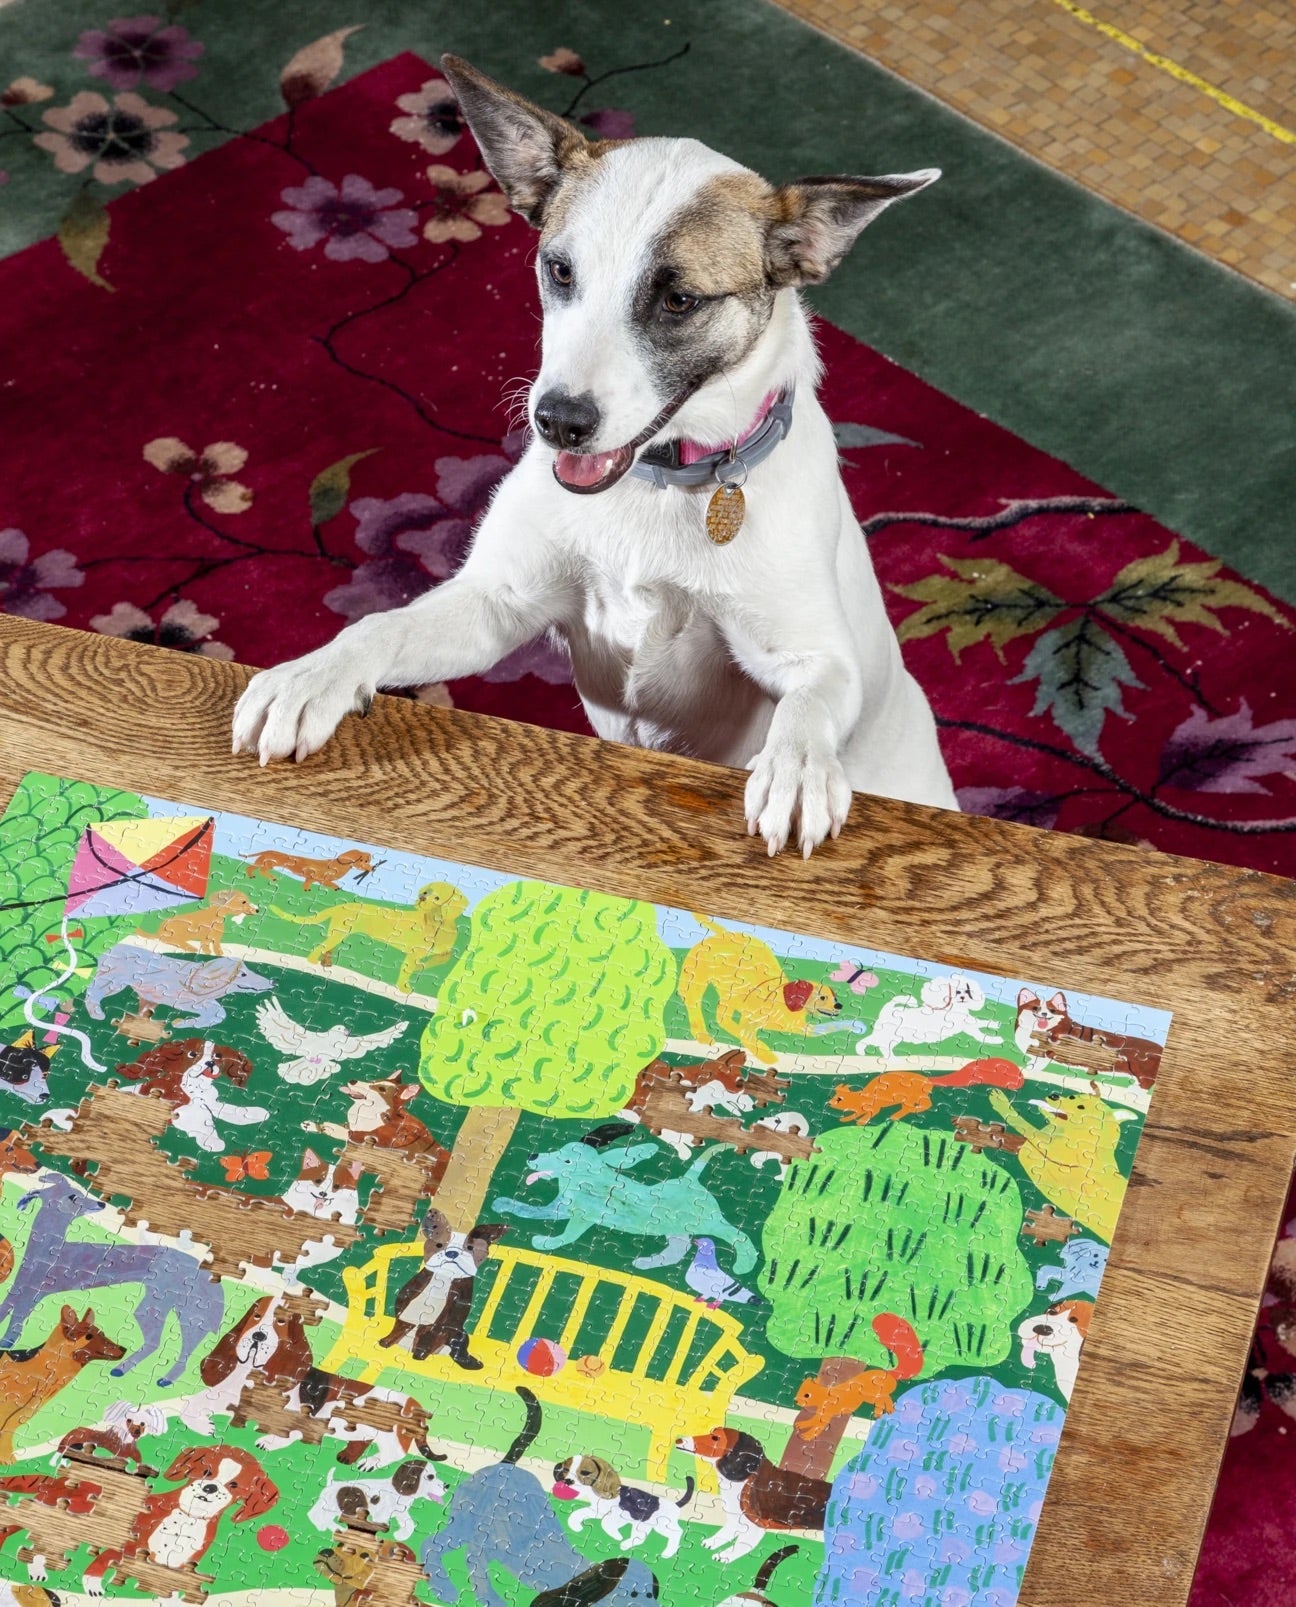 Eeboo Dogs in the Park Puzzle 1000pc